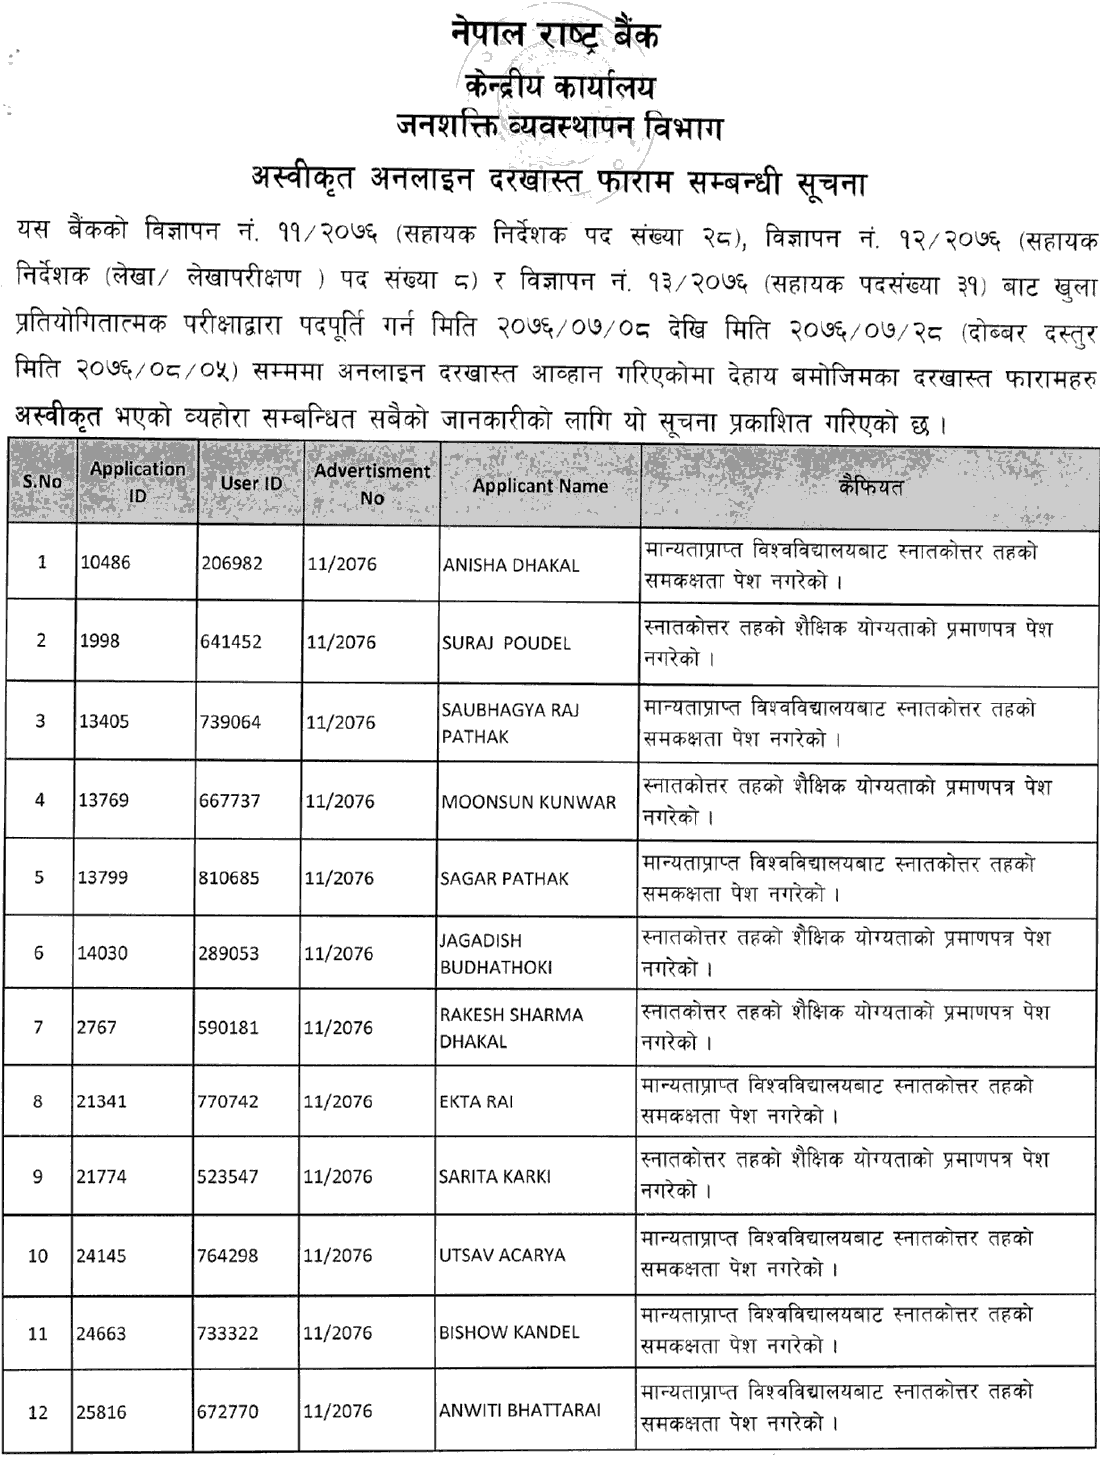 Nepal Rastra Bank Published Notice of Rejected Online Application Form